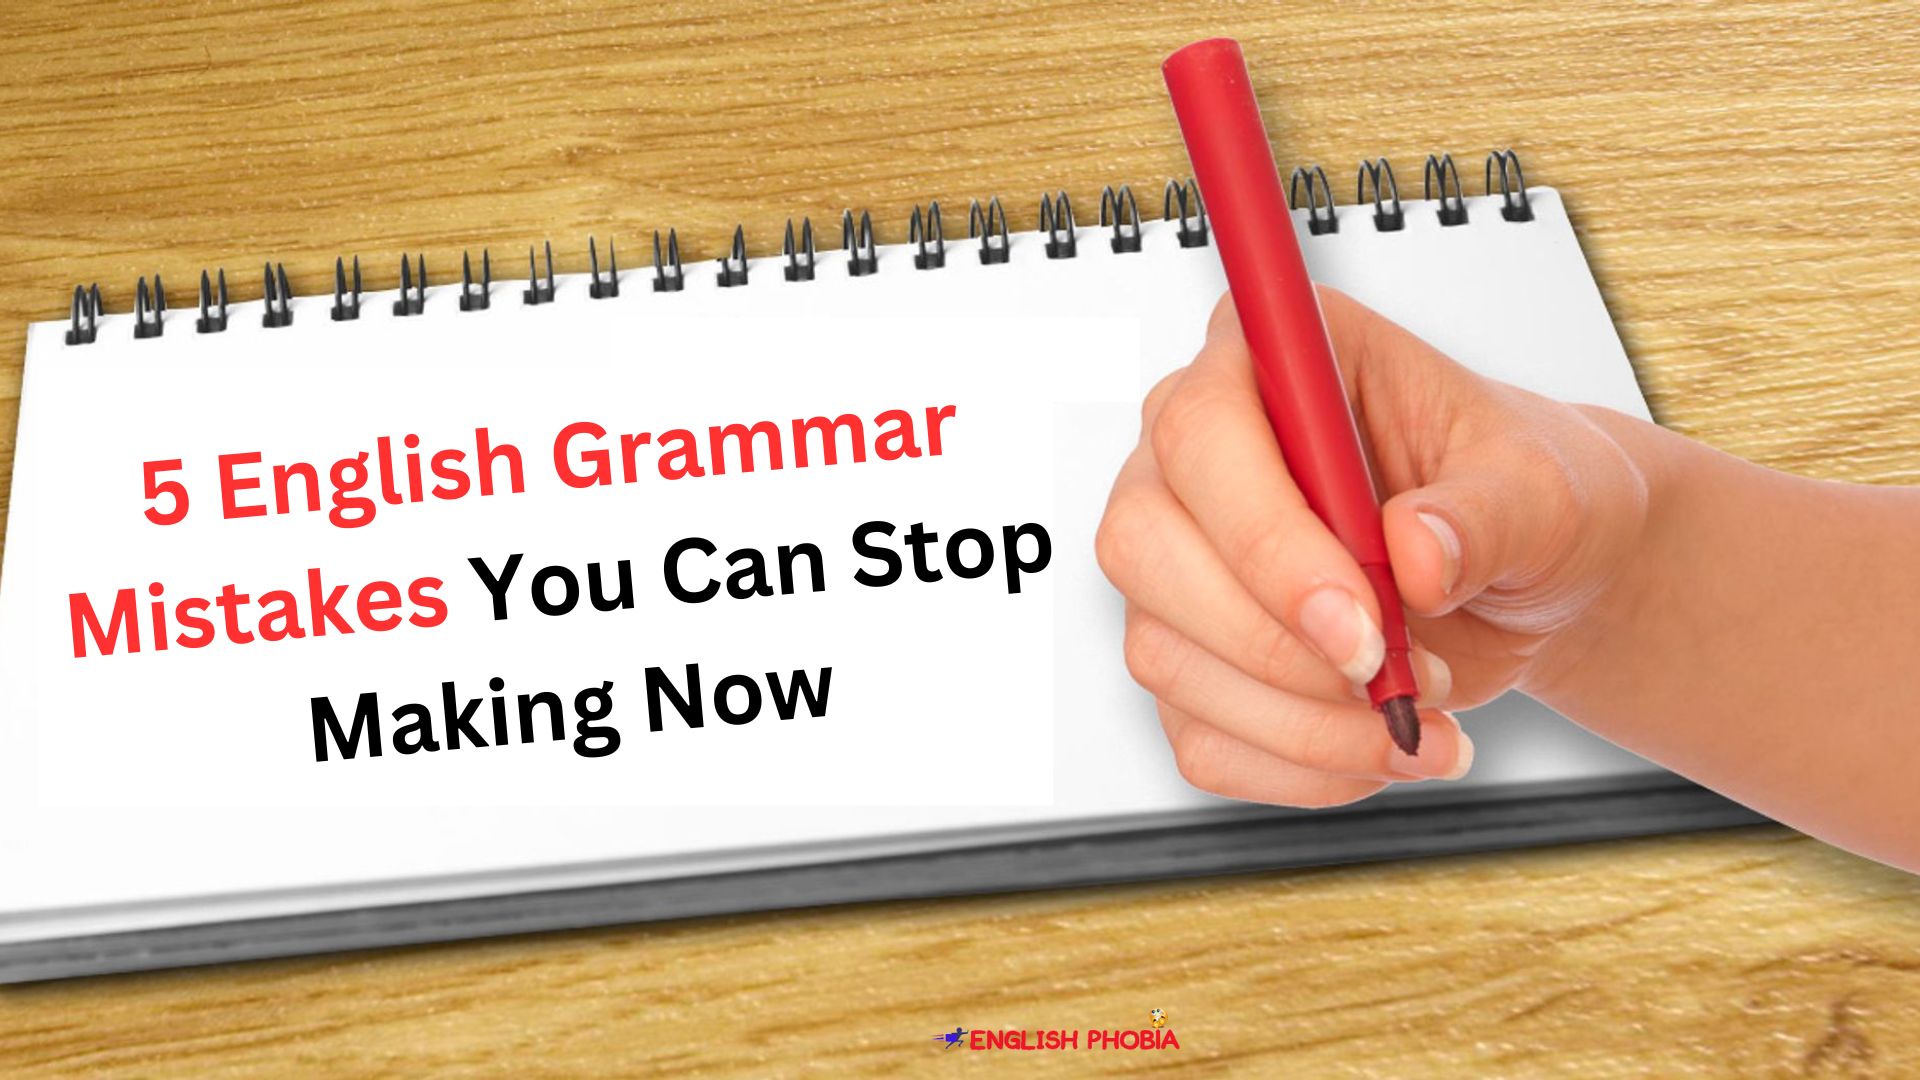 5 English Grammar Mistakes You Can Stop Making Now